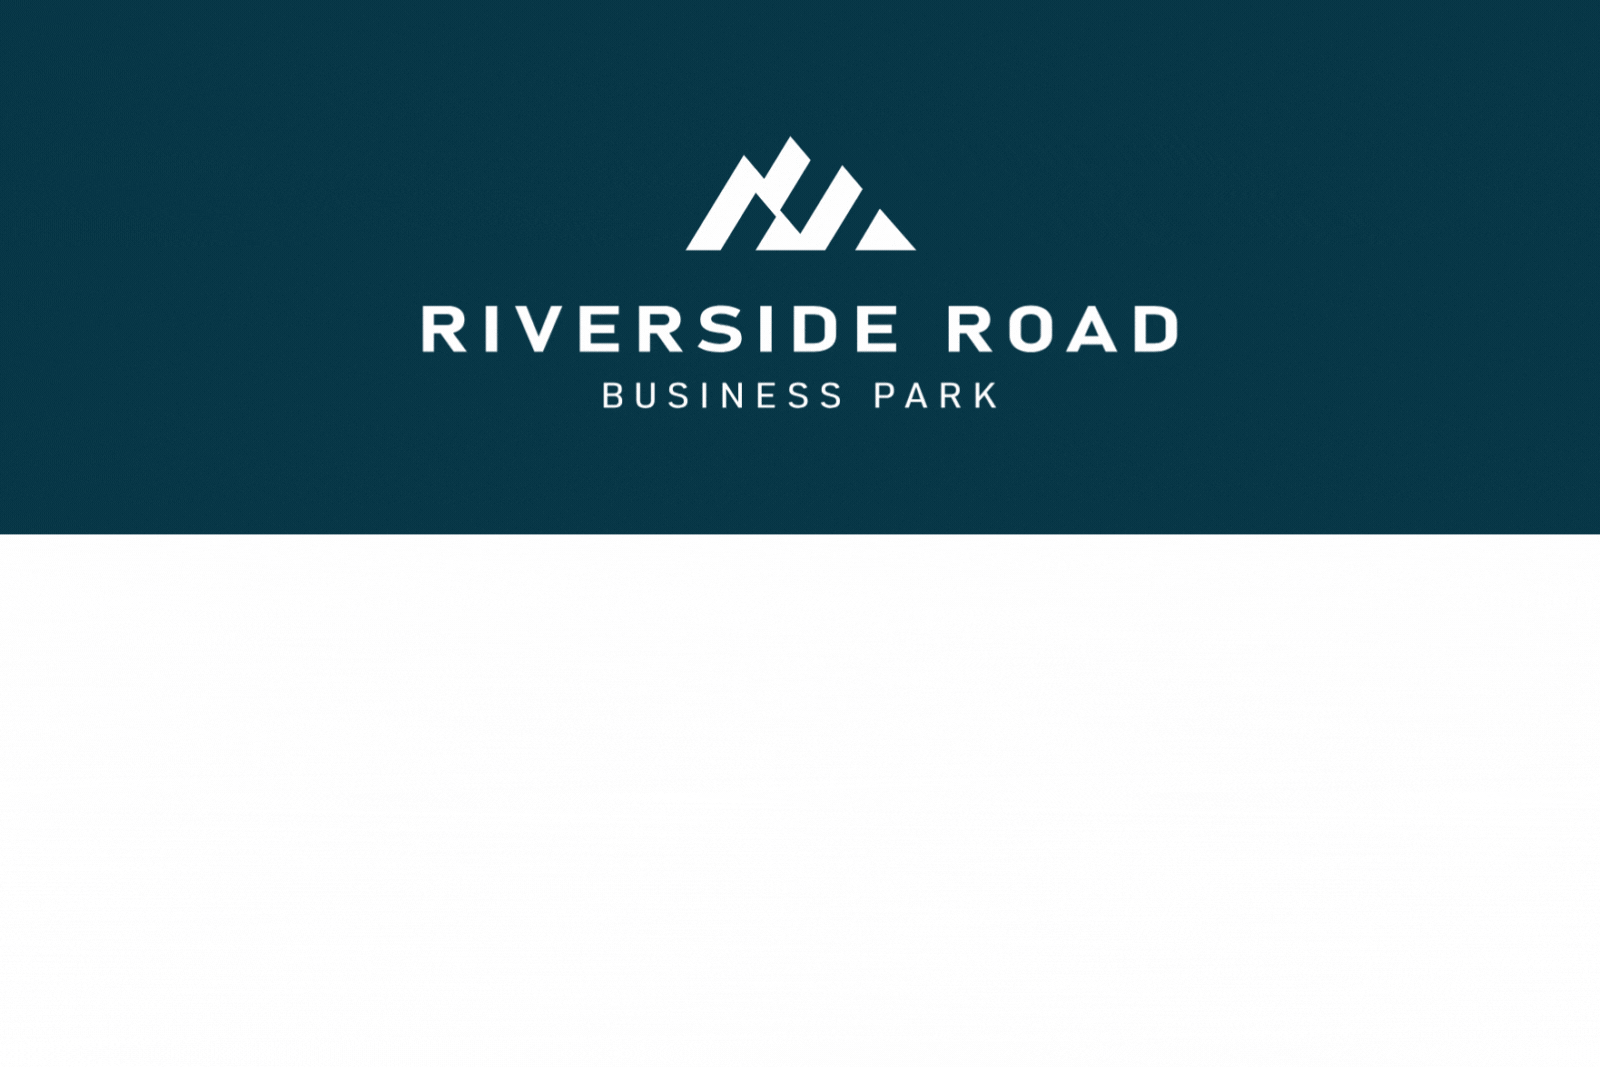 Riverside Road Industrial Strata Presale Website Launch with Avison Young